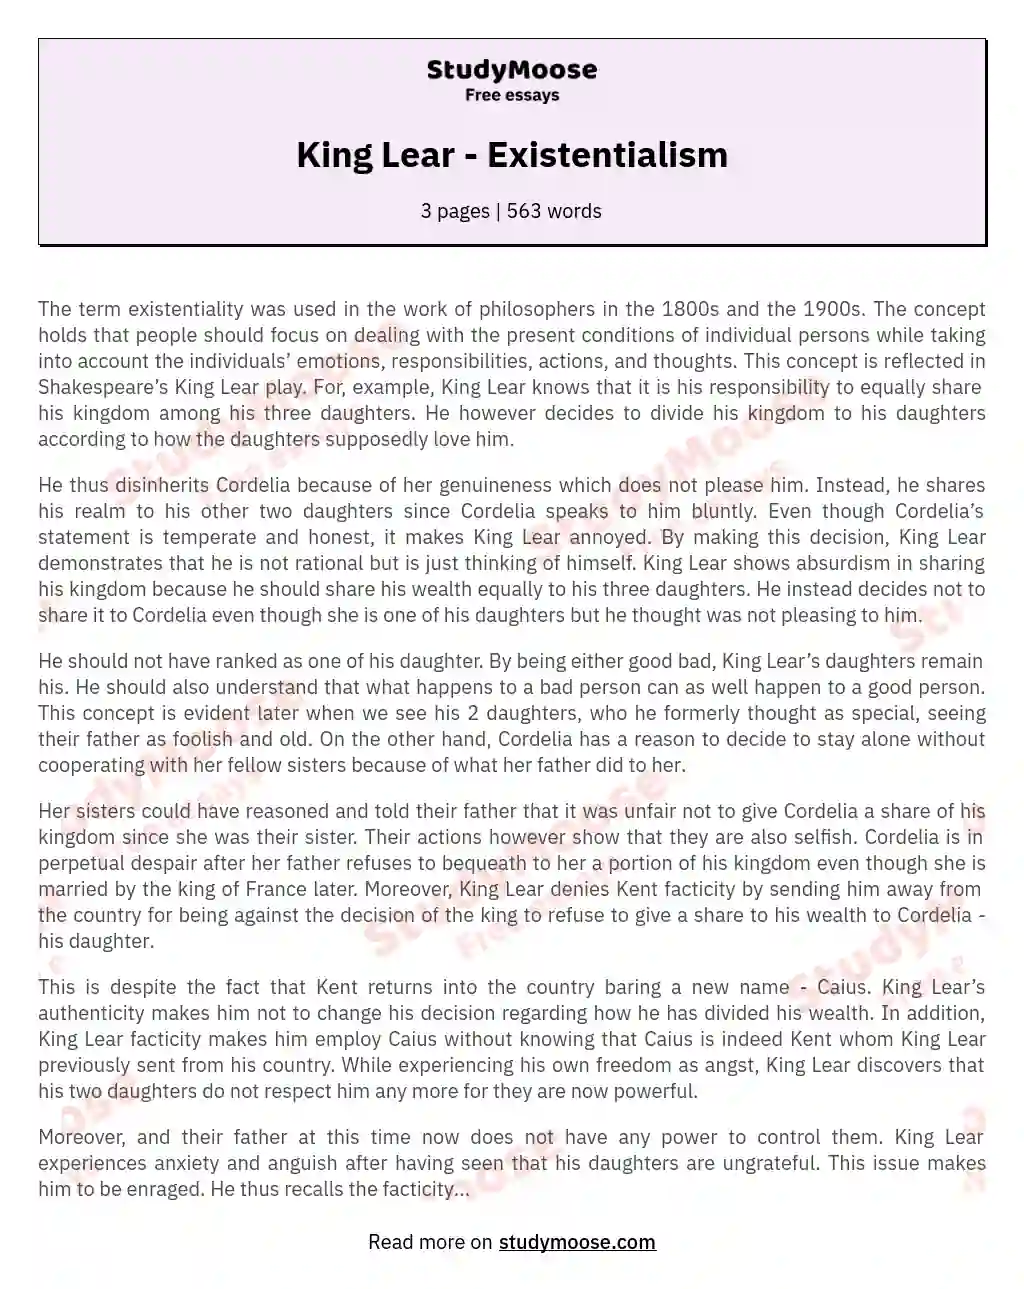 King Lear - Existentialism